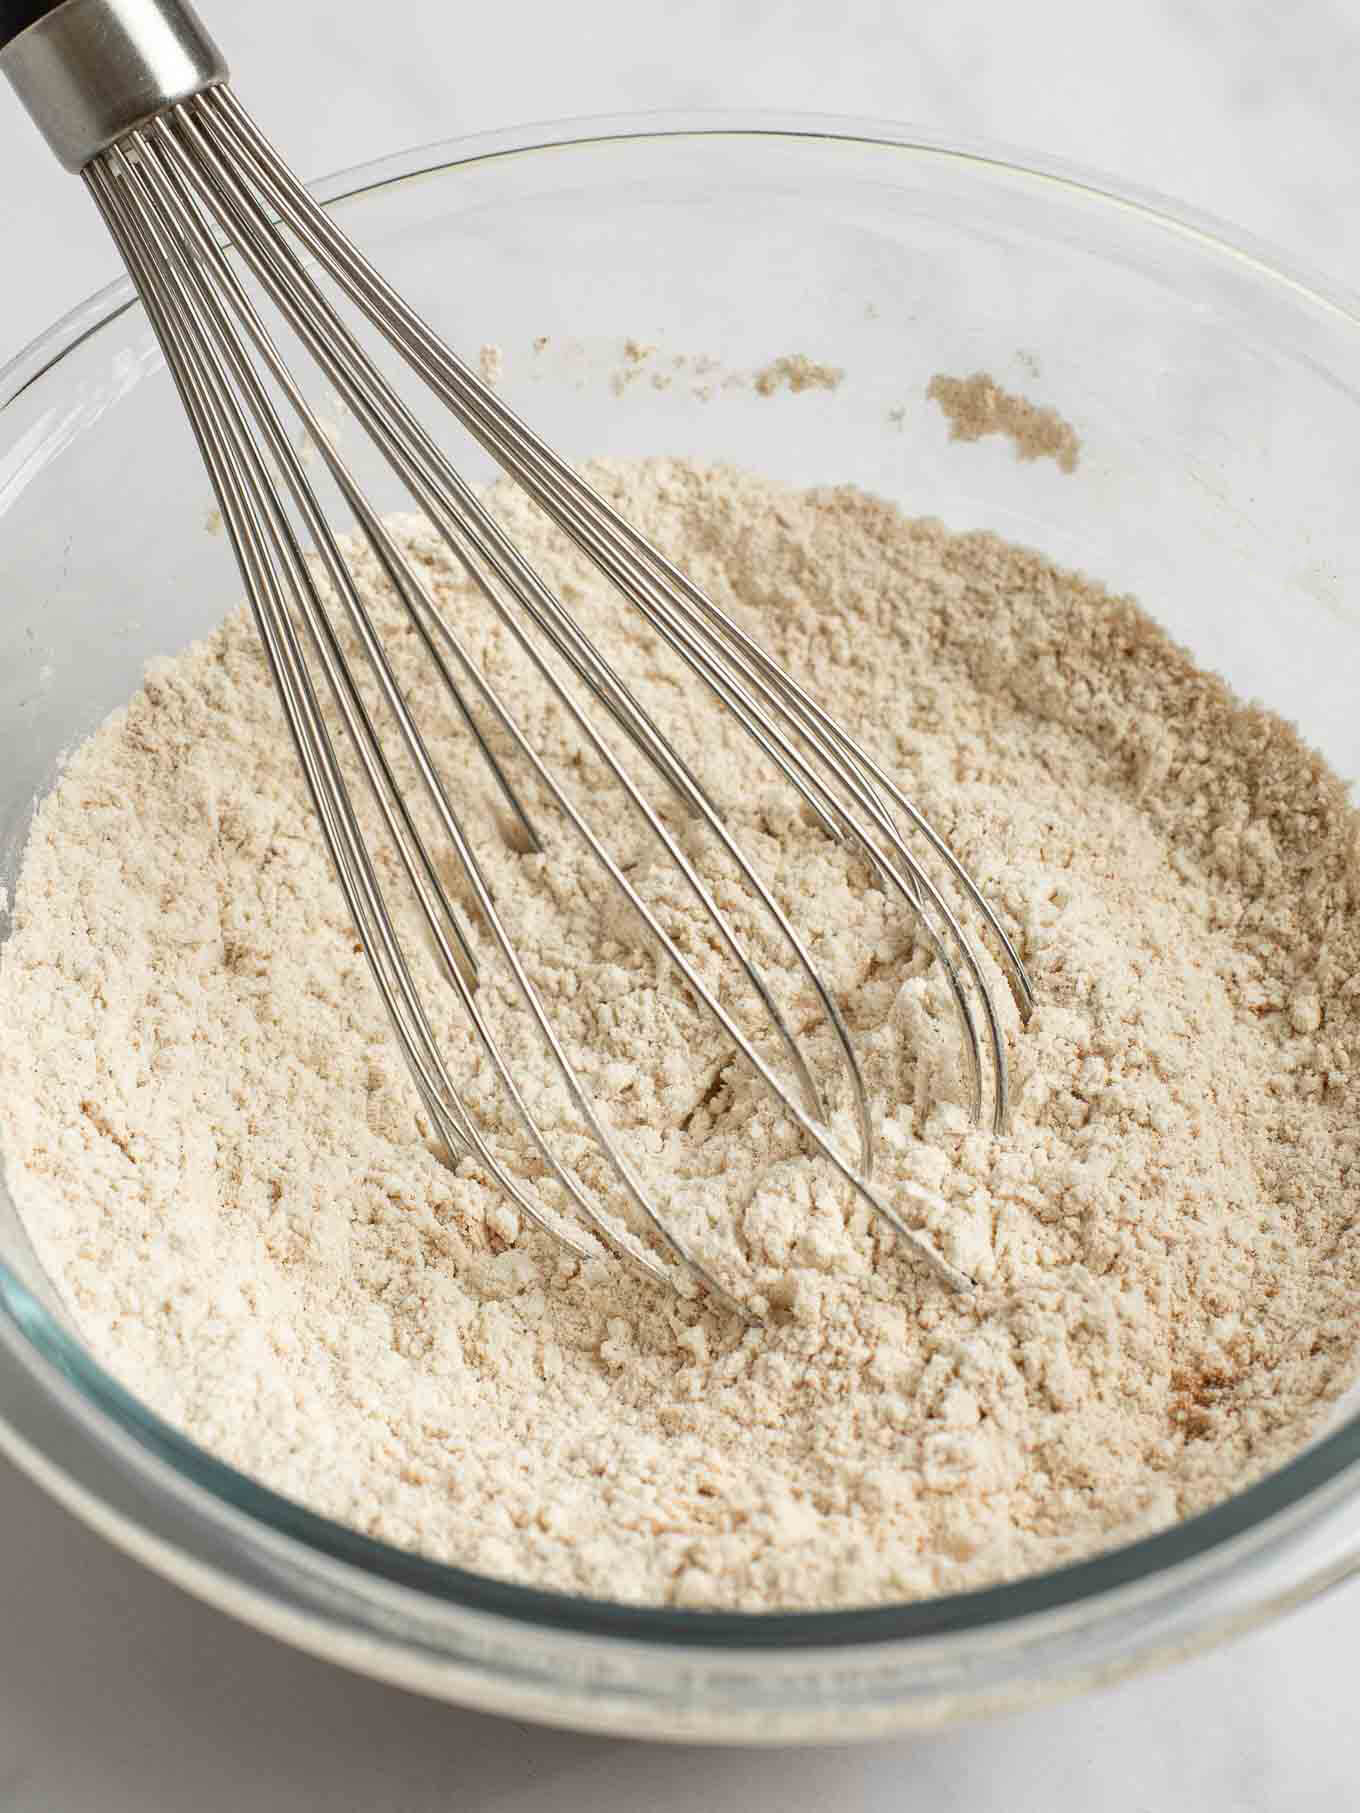 Flour, spices, baking soda, cream of tartar, and salt whisked together in a glass mixing bowl.